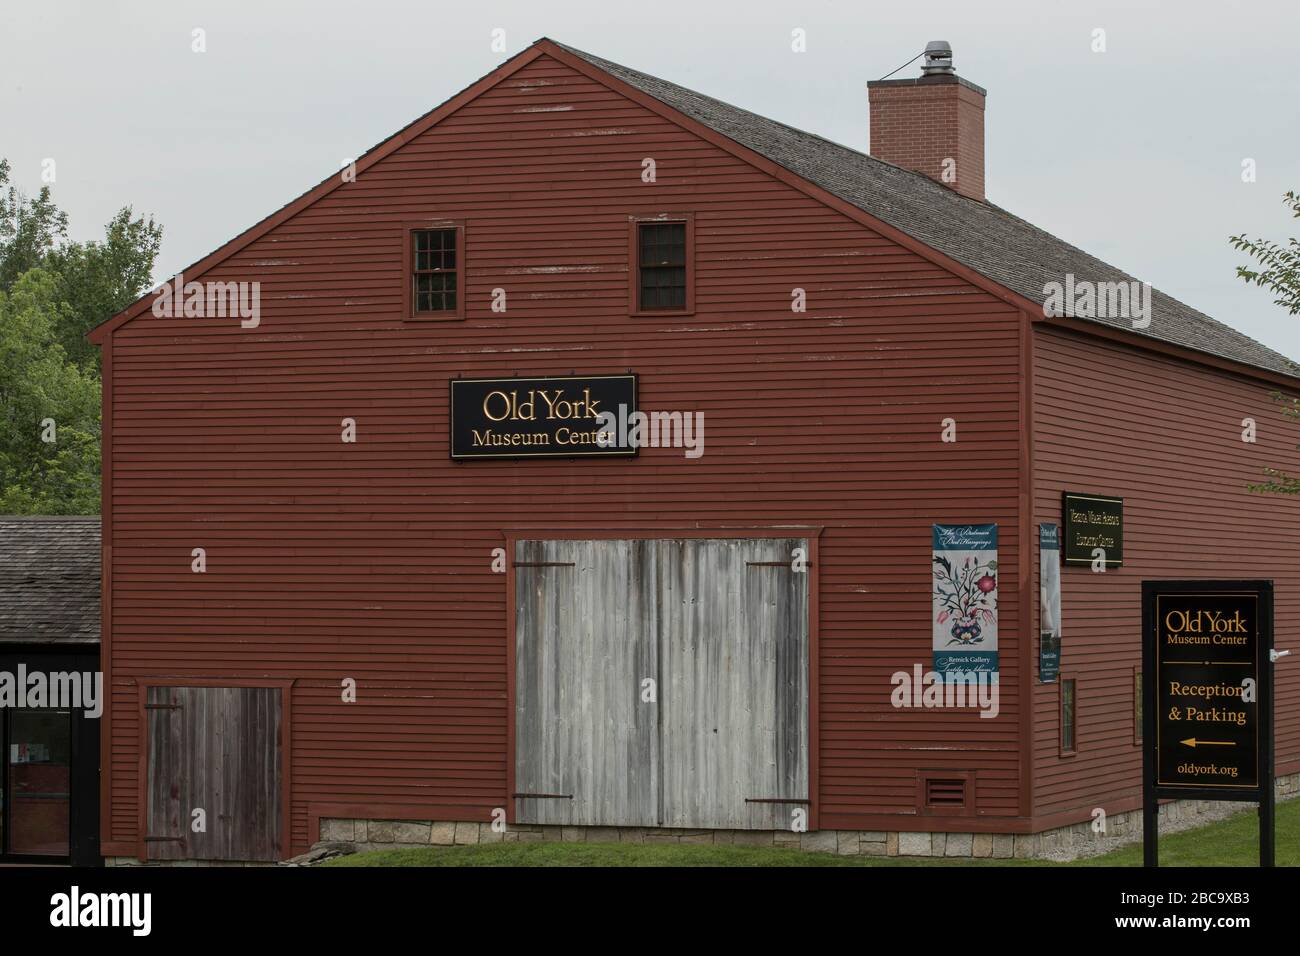 They host area events here  and public programs as well. This building helps to support the area's historical places within Old York Village Maine. Stock Photo